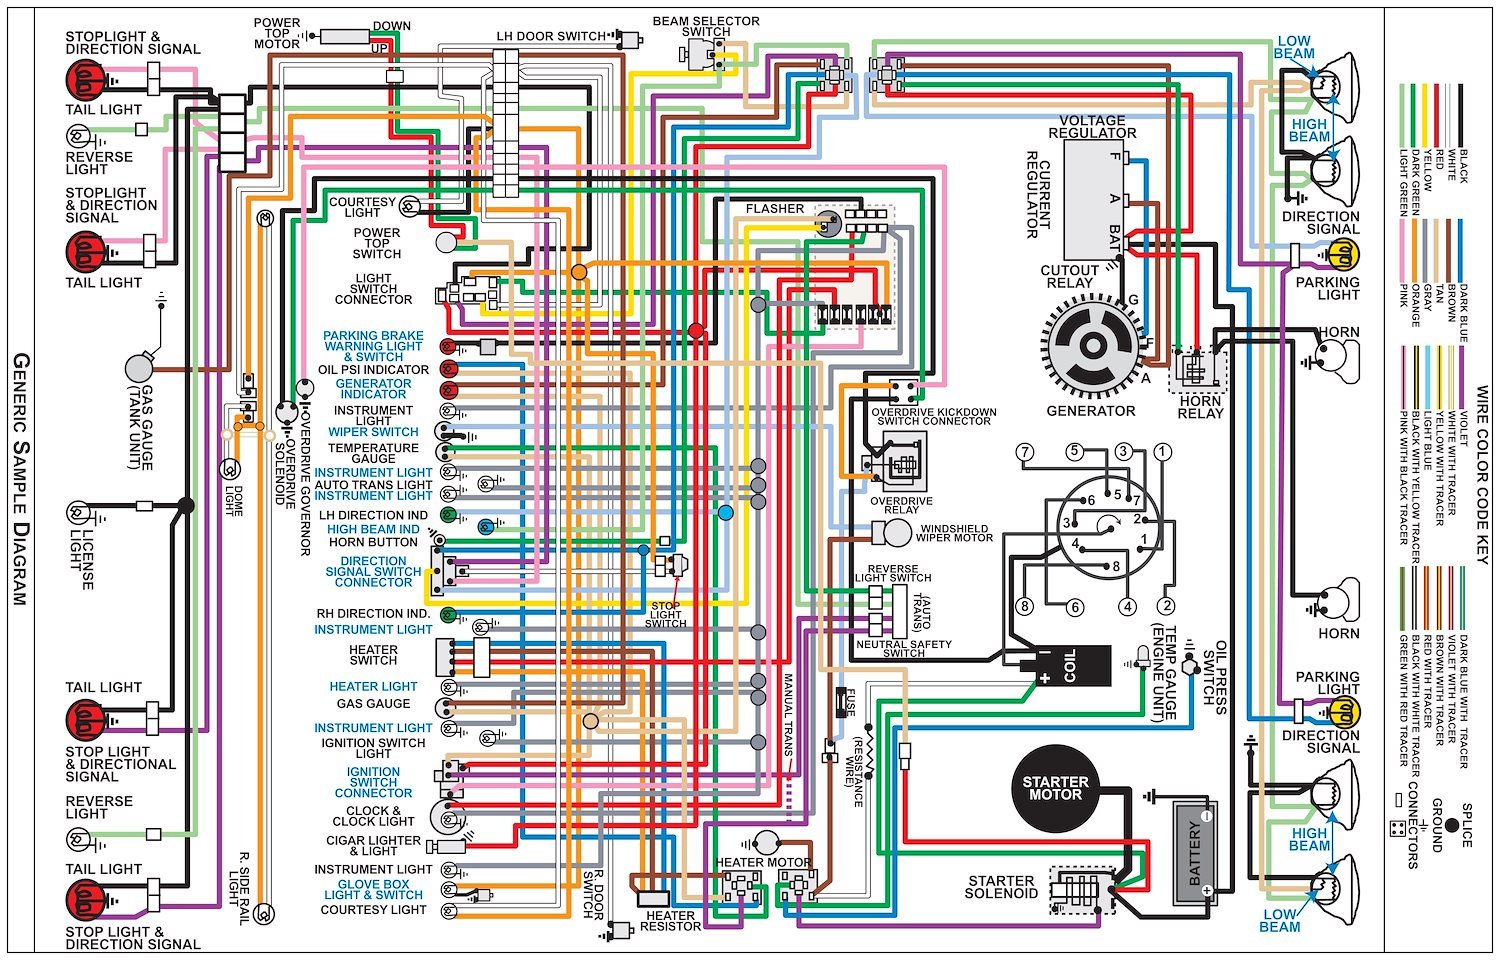 Wiring Diagram for 1972 Chevy Chevelle, El Camino,